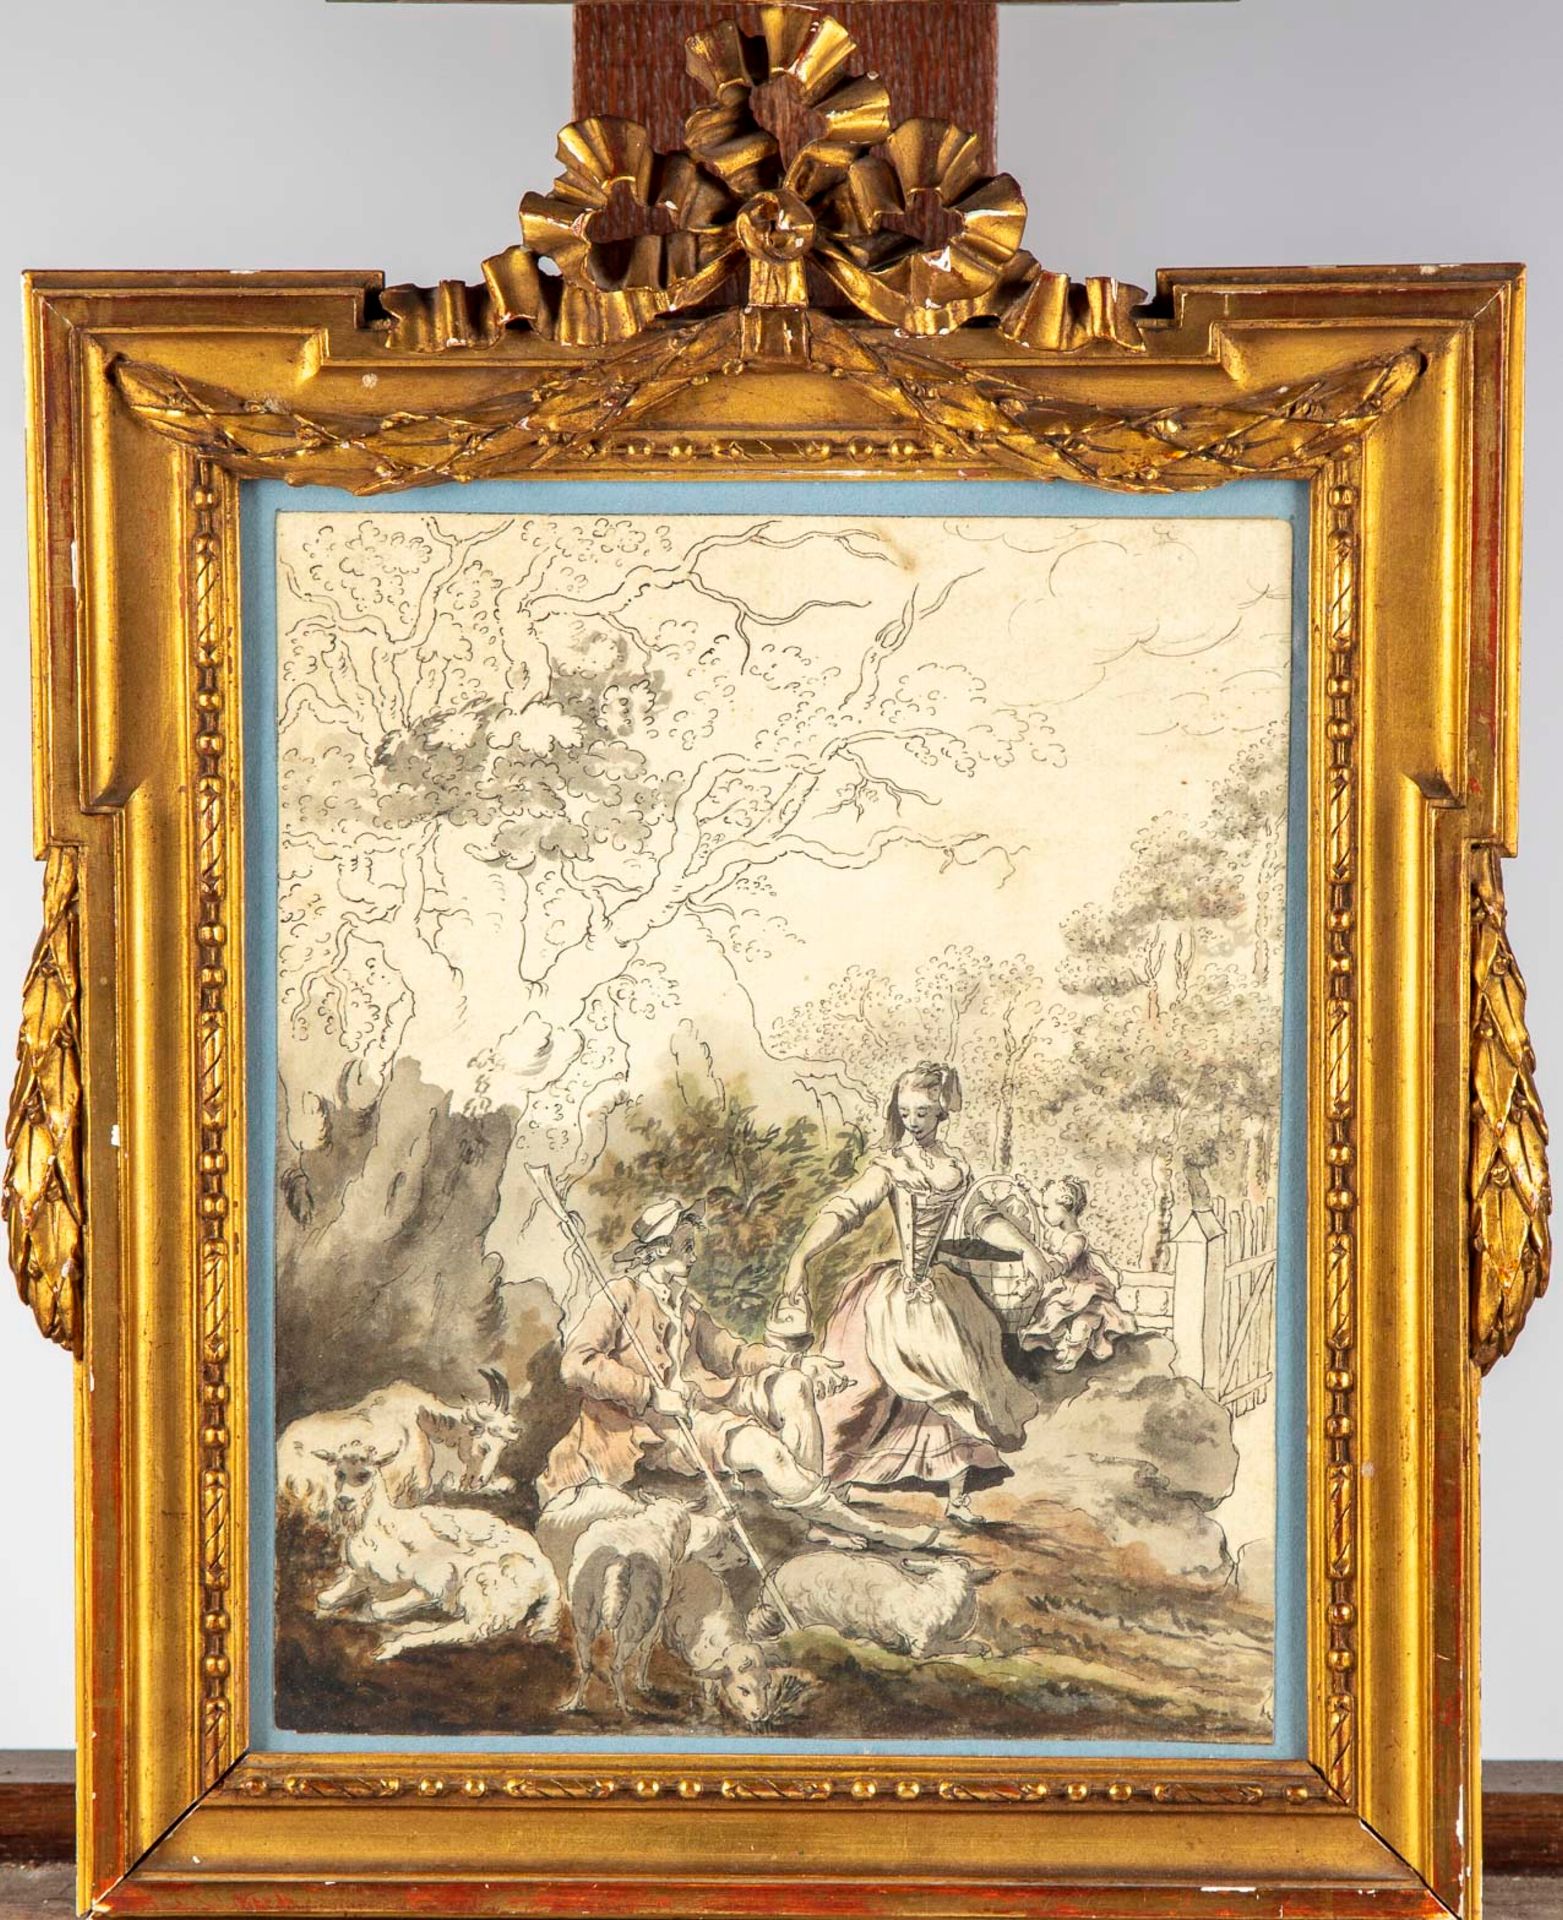 ECOLE FRANCAISE FRENCH SCHOOL of the late 18th century

Pastoral scene

Drawing &hellip;